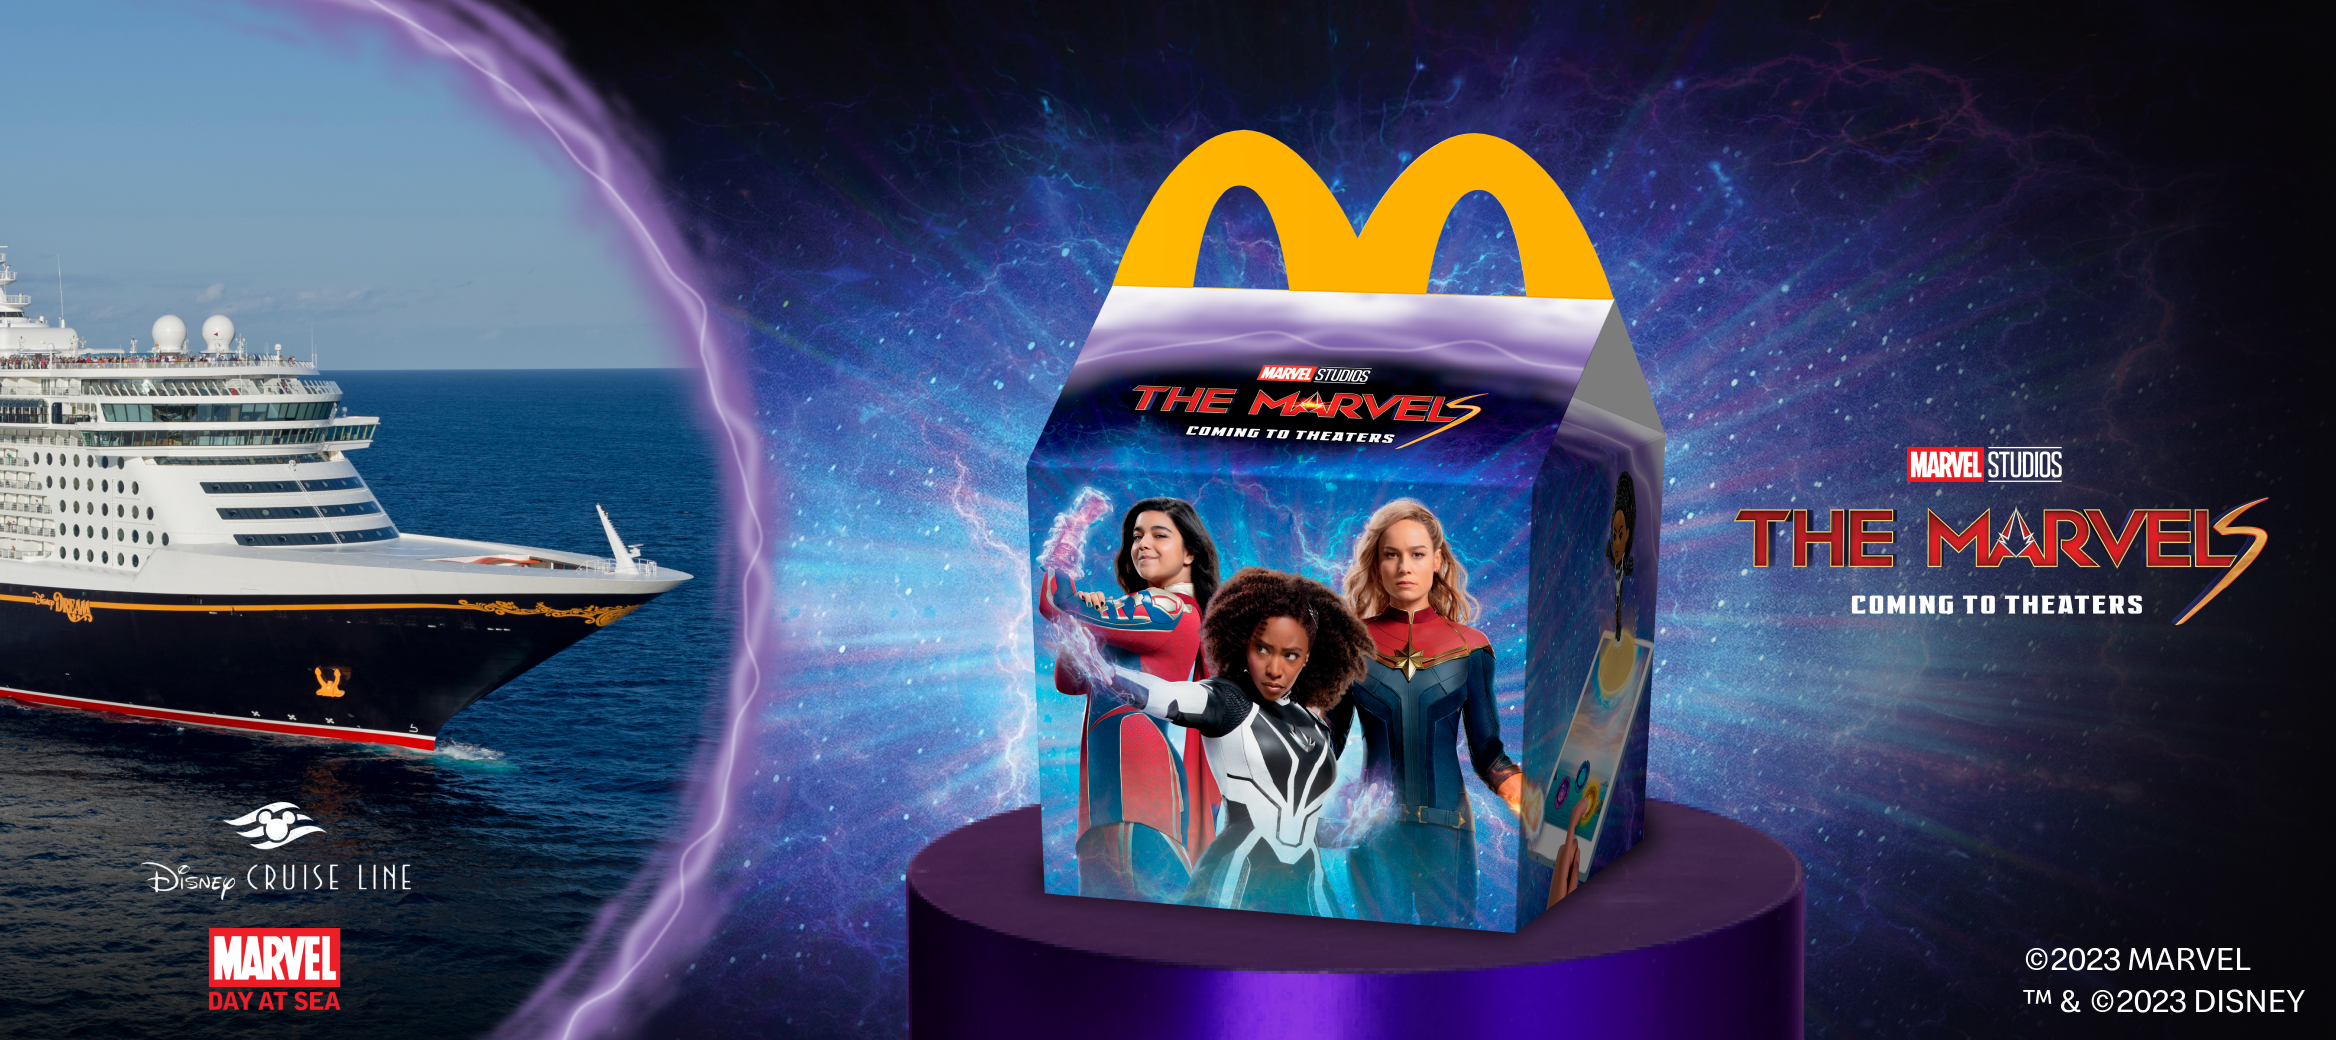 Happy Meal teams up with Marvel Studios’ The Marvels—coming to theaters 